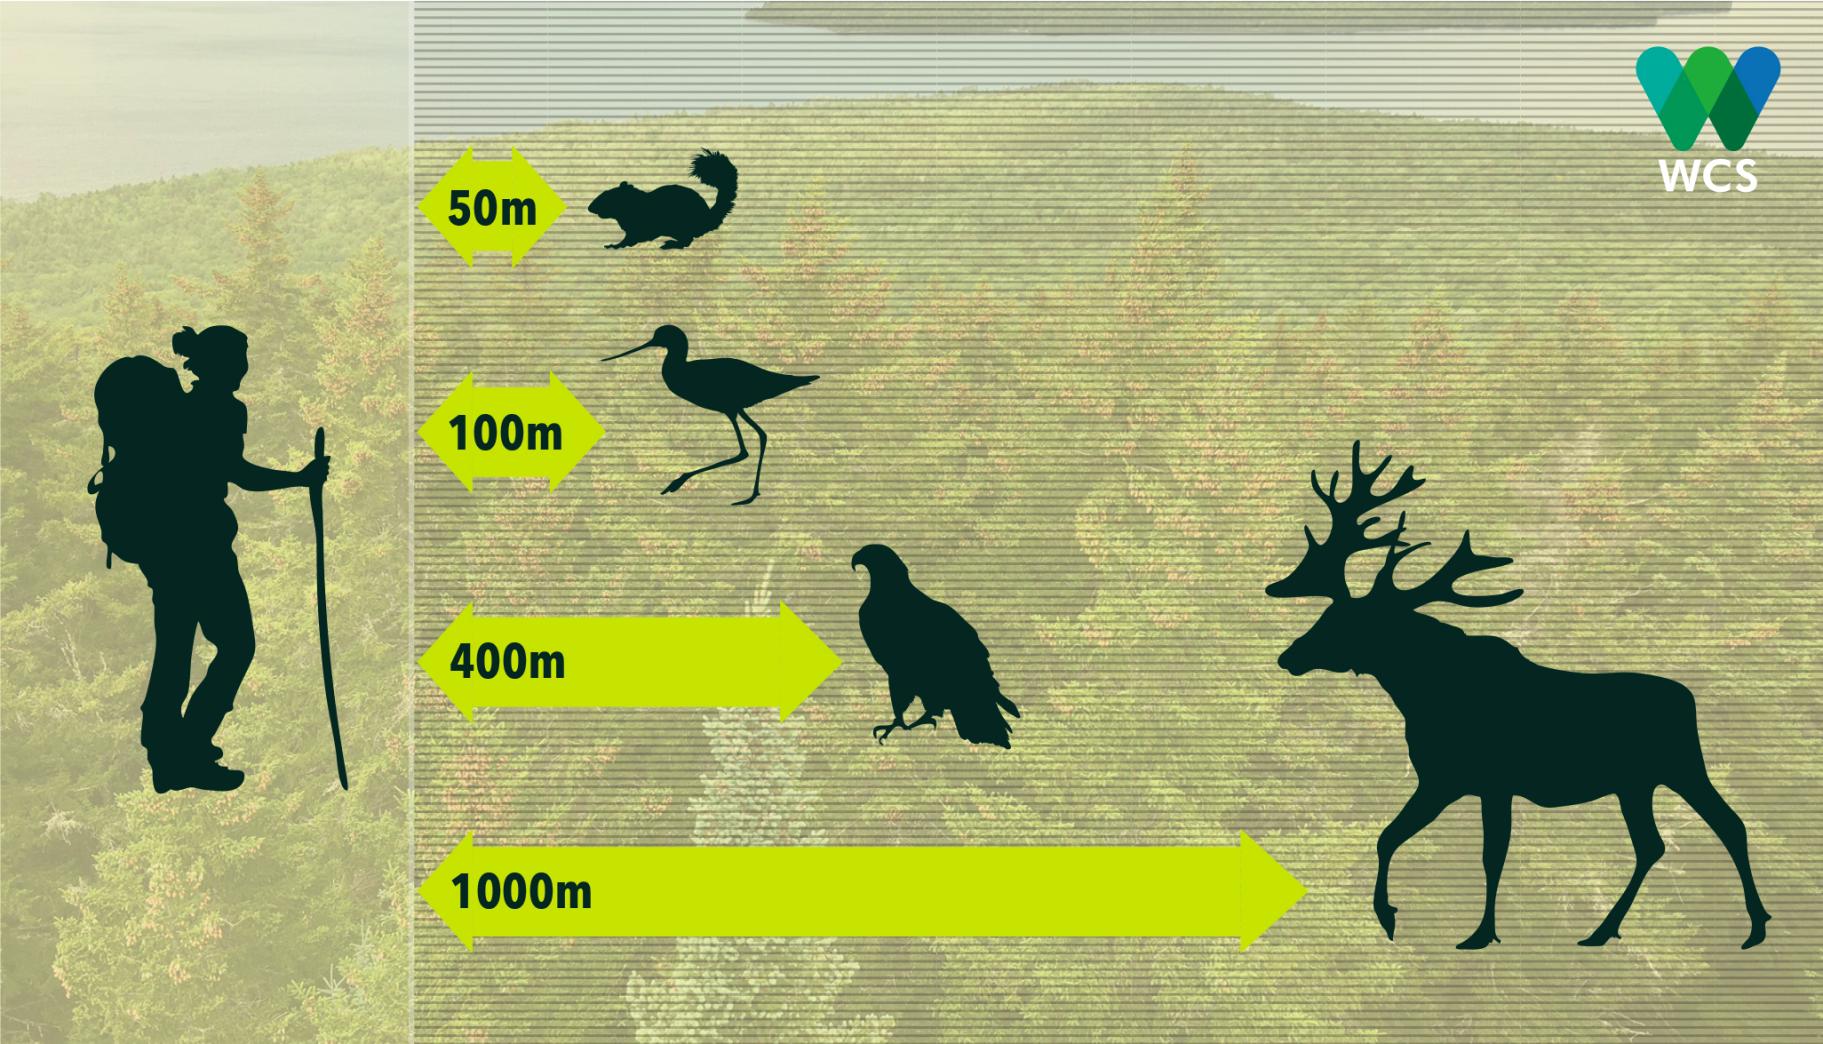 A graphic from the report showing the relative distances from a hiker that wildlife are disturbed.